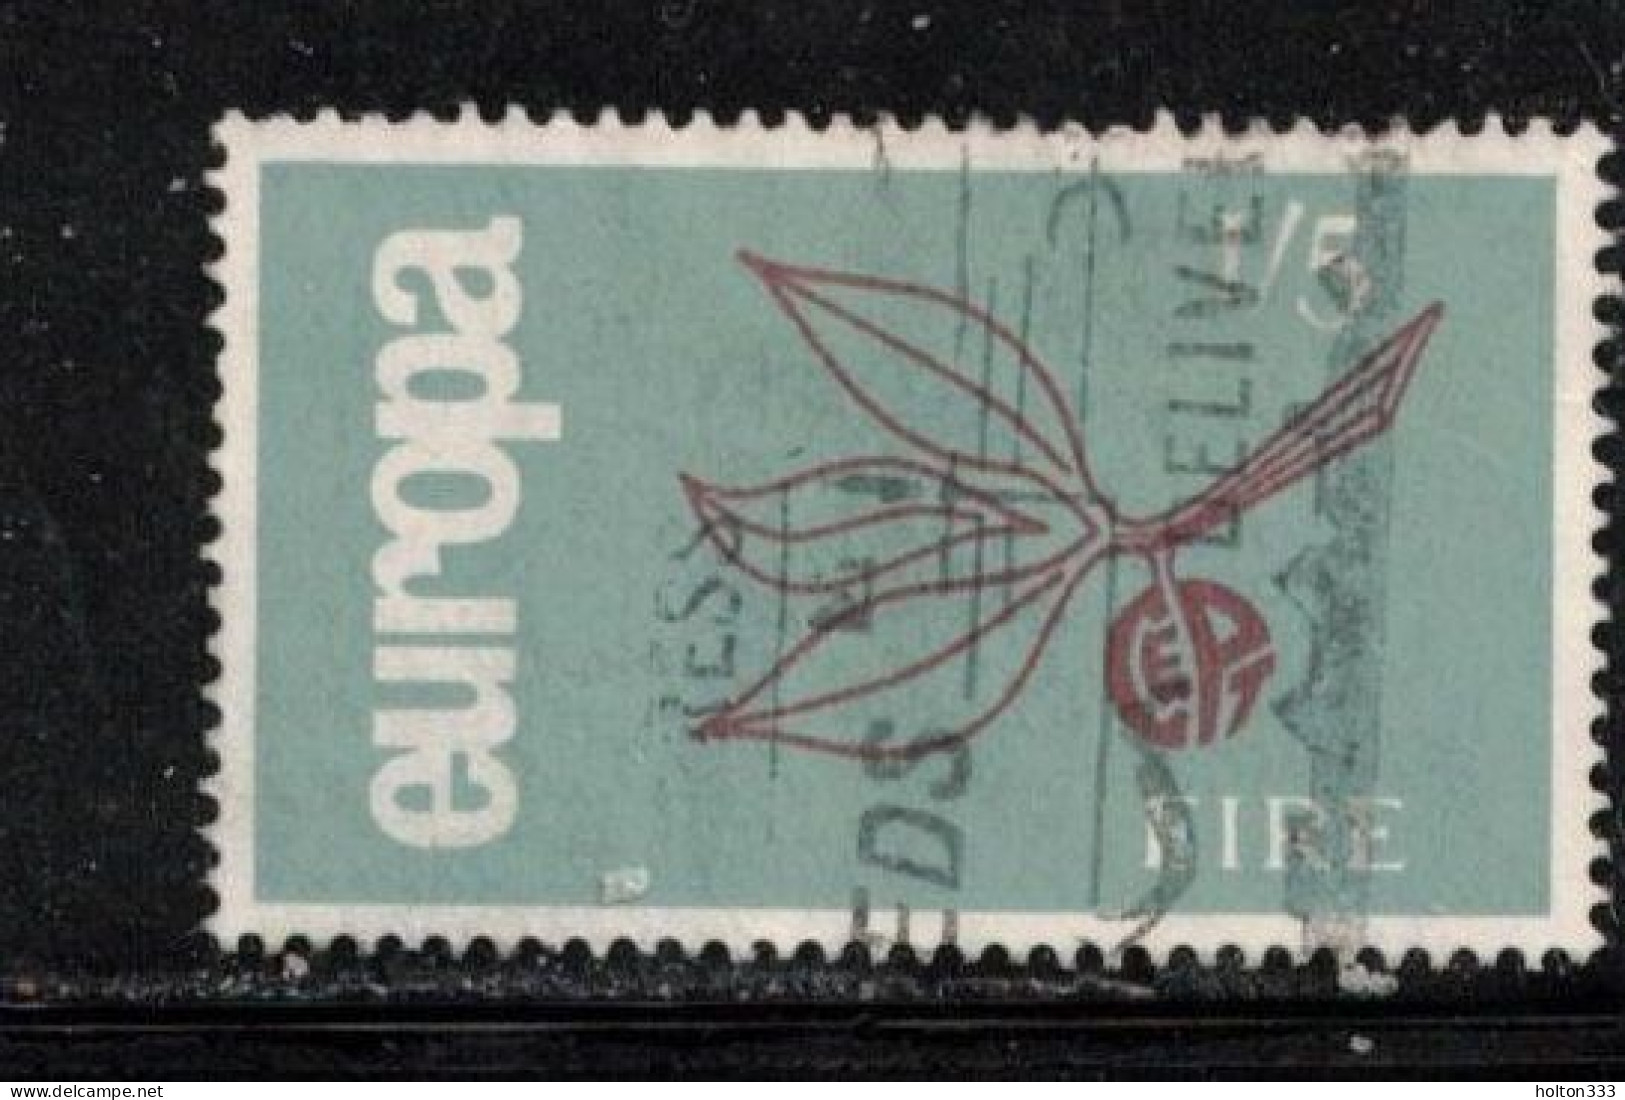 IRELAND Scott # 205 Used - 1965 Europa Issue - Used Stamps